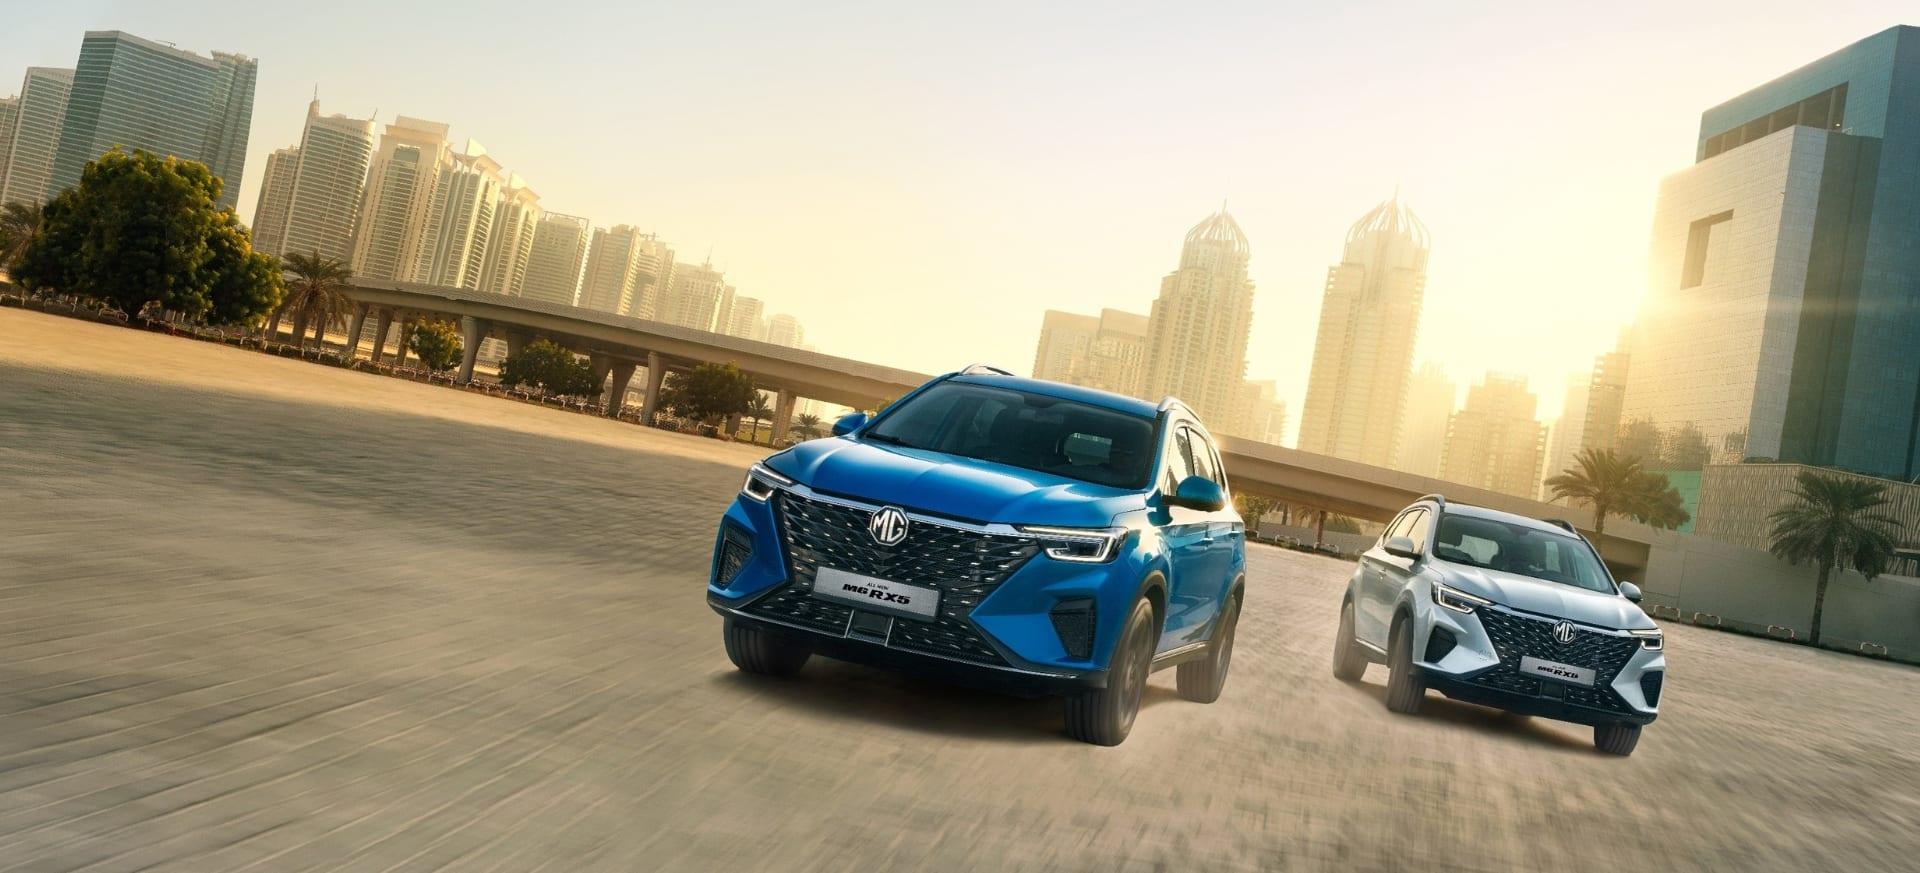 How does the reborn MG RX5 fare on the UAE's highest peak?